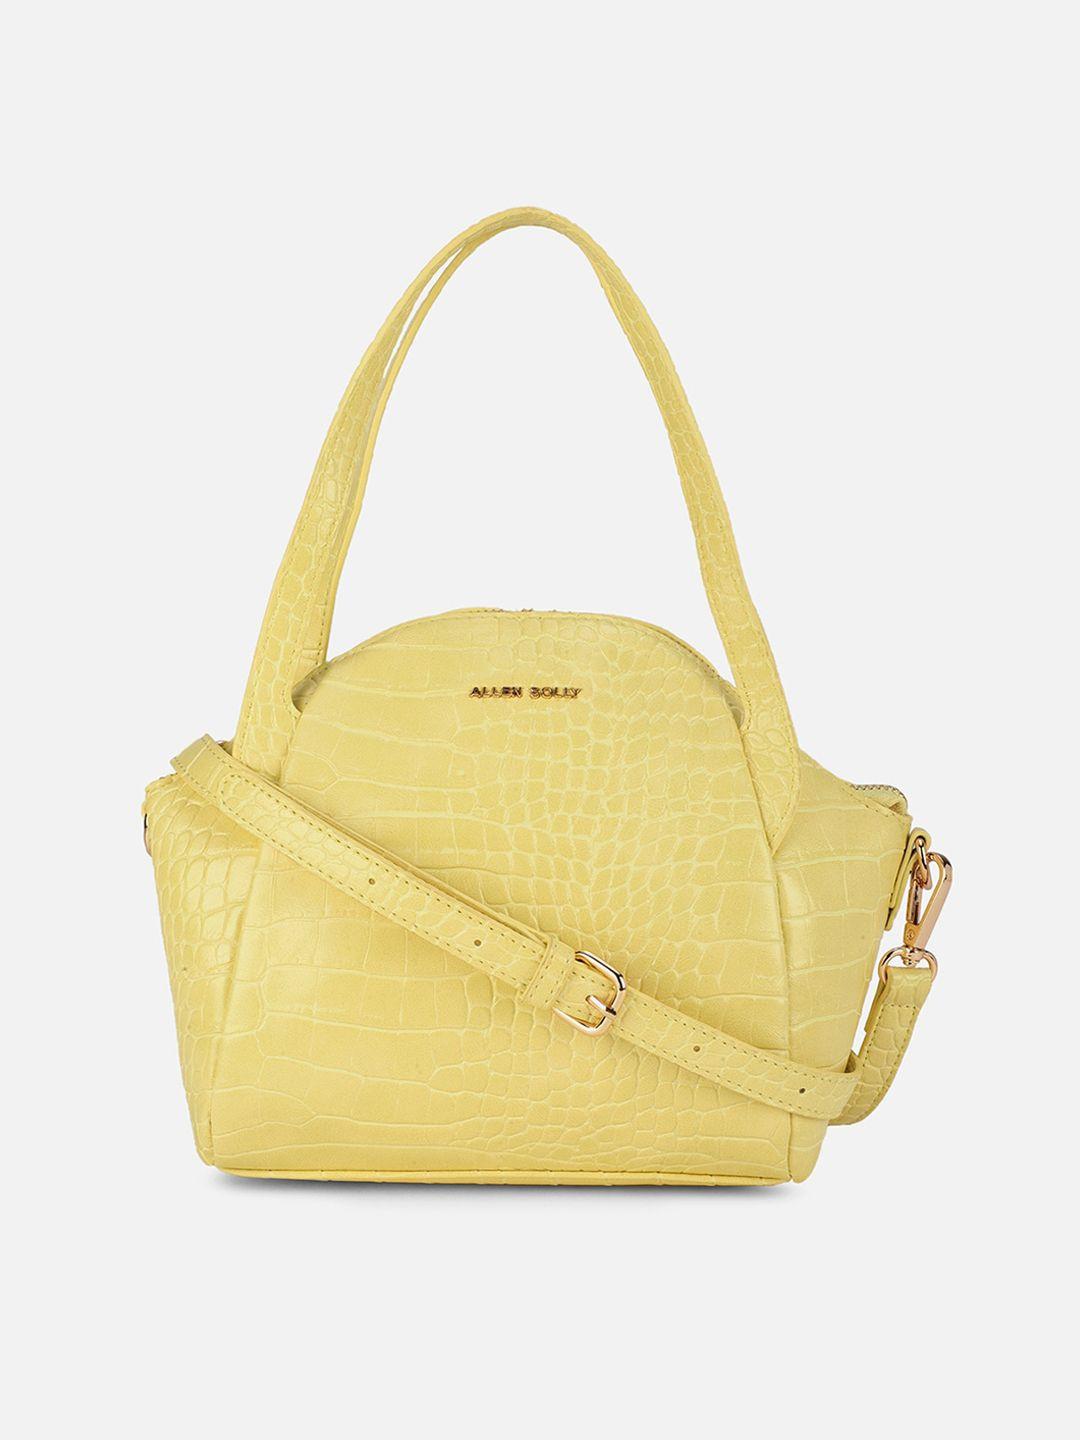 allen solly yellow pu structured handheld bag with quilted